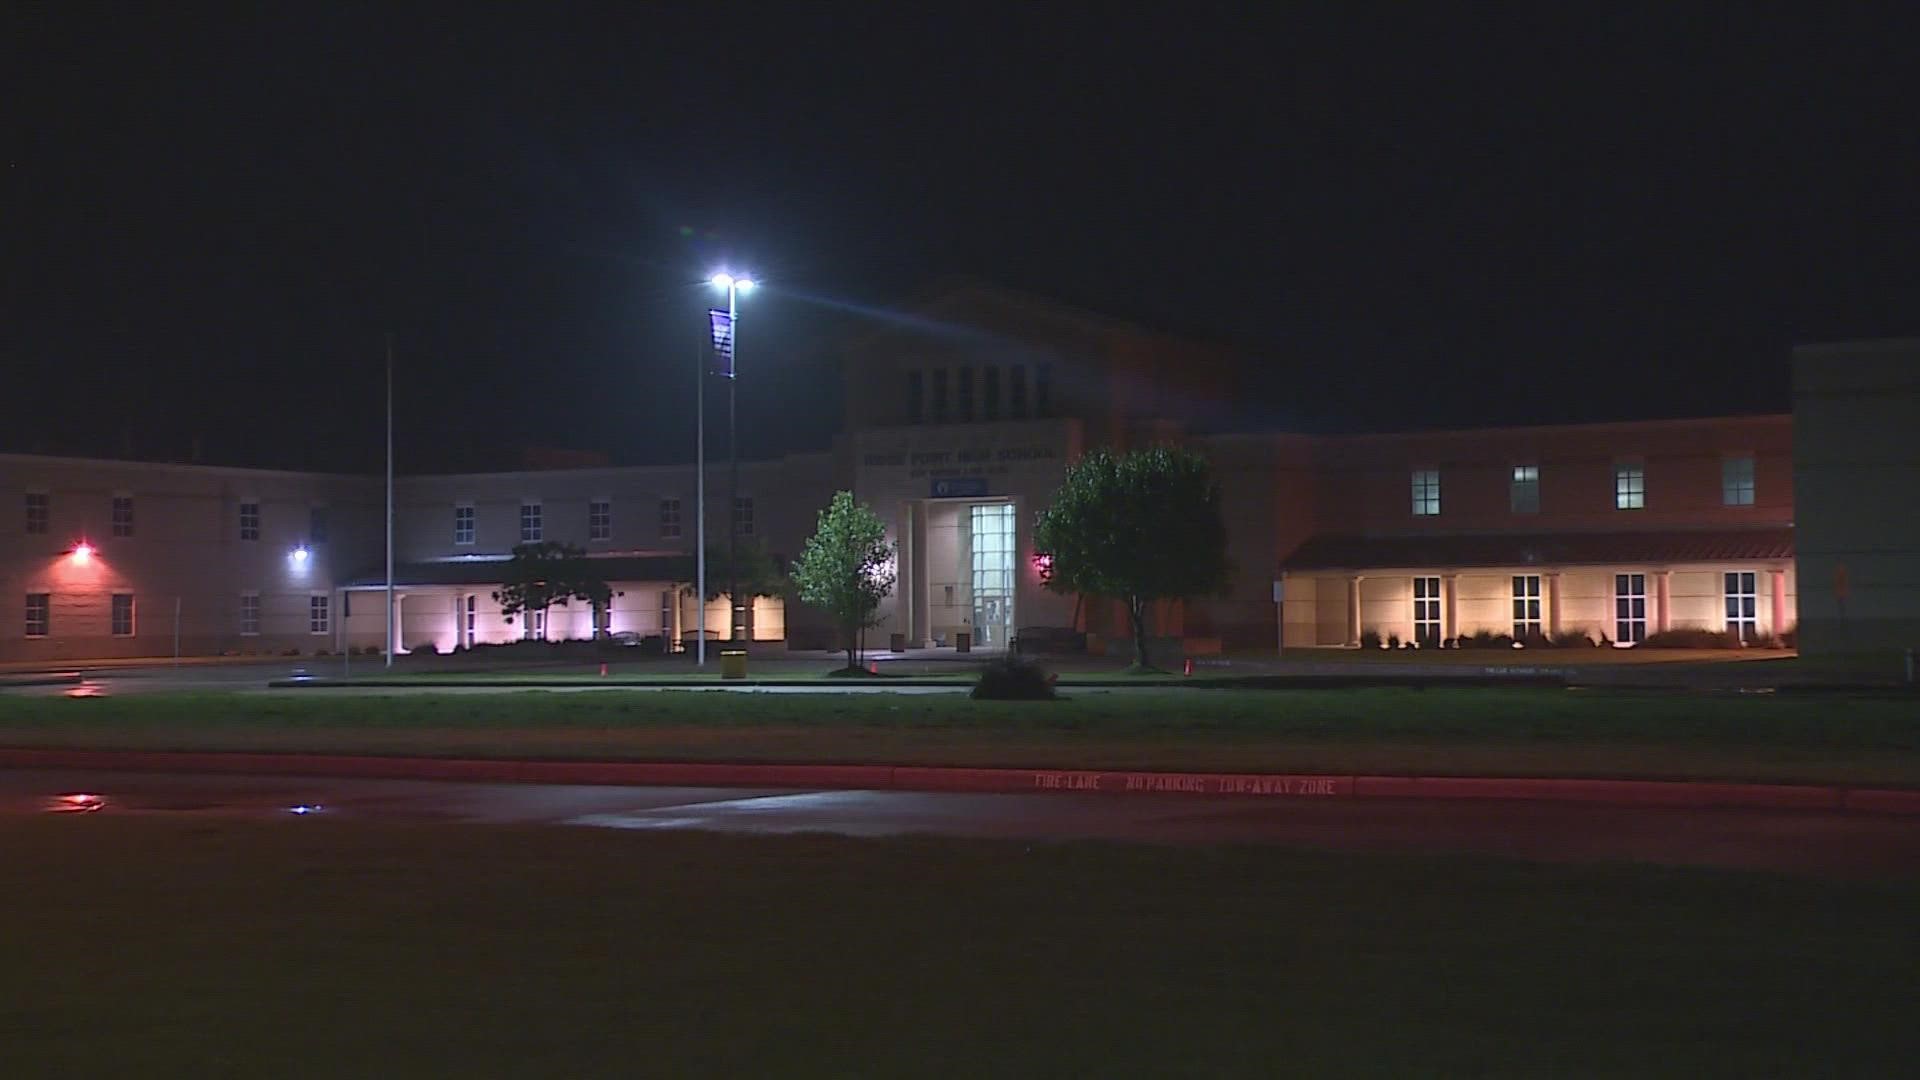 A Ridge Point High School student has a confirmed case of monkeypox, according to Fort Bend ISD.